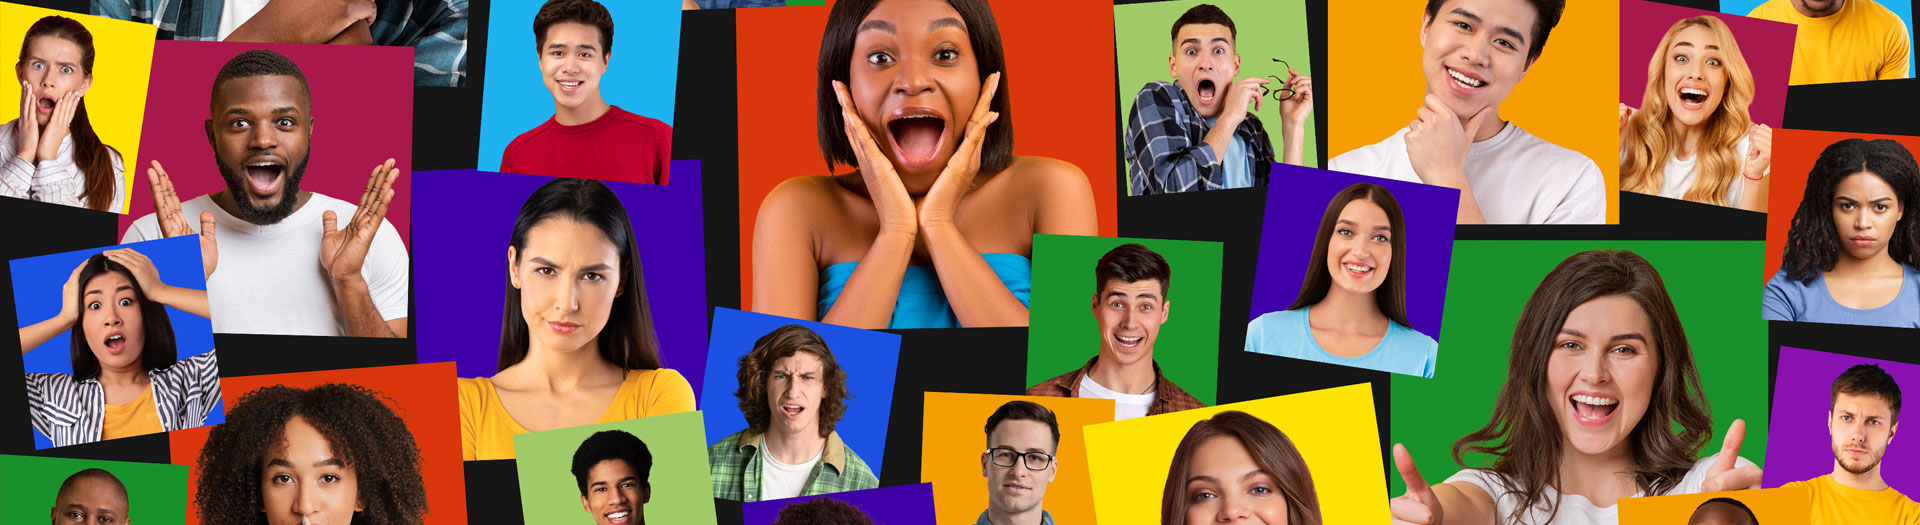 A vibrant collage of diverse people displaying a range of emotions. Each individual is set against a brightly colored background, contributing to a lively and dynamic mosaic of expressions.